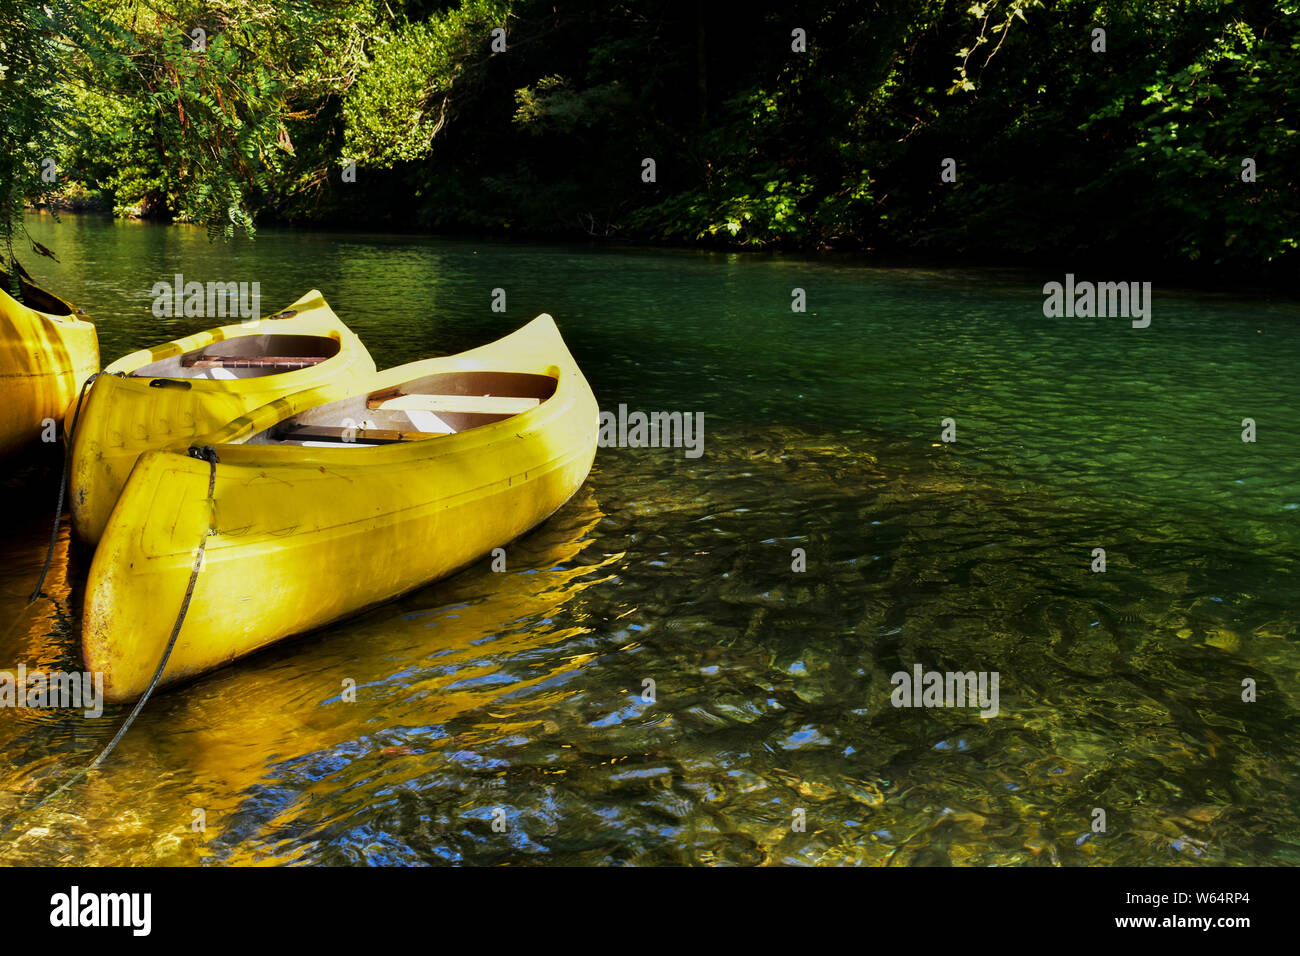 Kayaking on peaceful calm water/ Yellow kayak at beautiful green river/ Conceptual image of sport and recreation Stock Photo